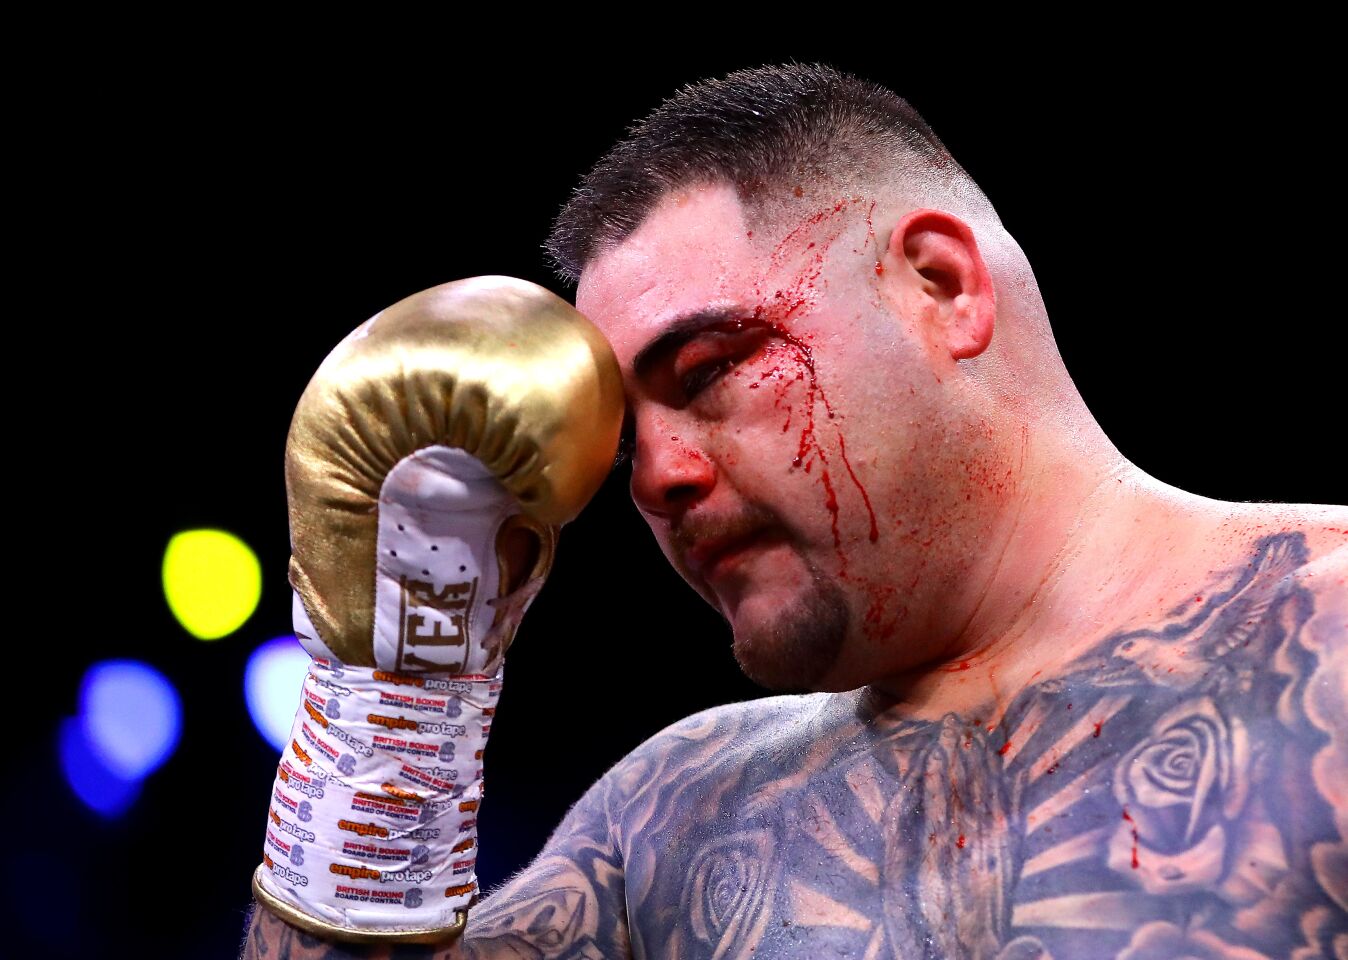 Andy Ruiz Jr. reacts with a cut to his left eye during a heavyweight title fight with Anthony Joshua on Dec. 7 in Diriyah, Saudi Arabia.